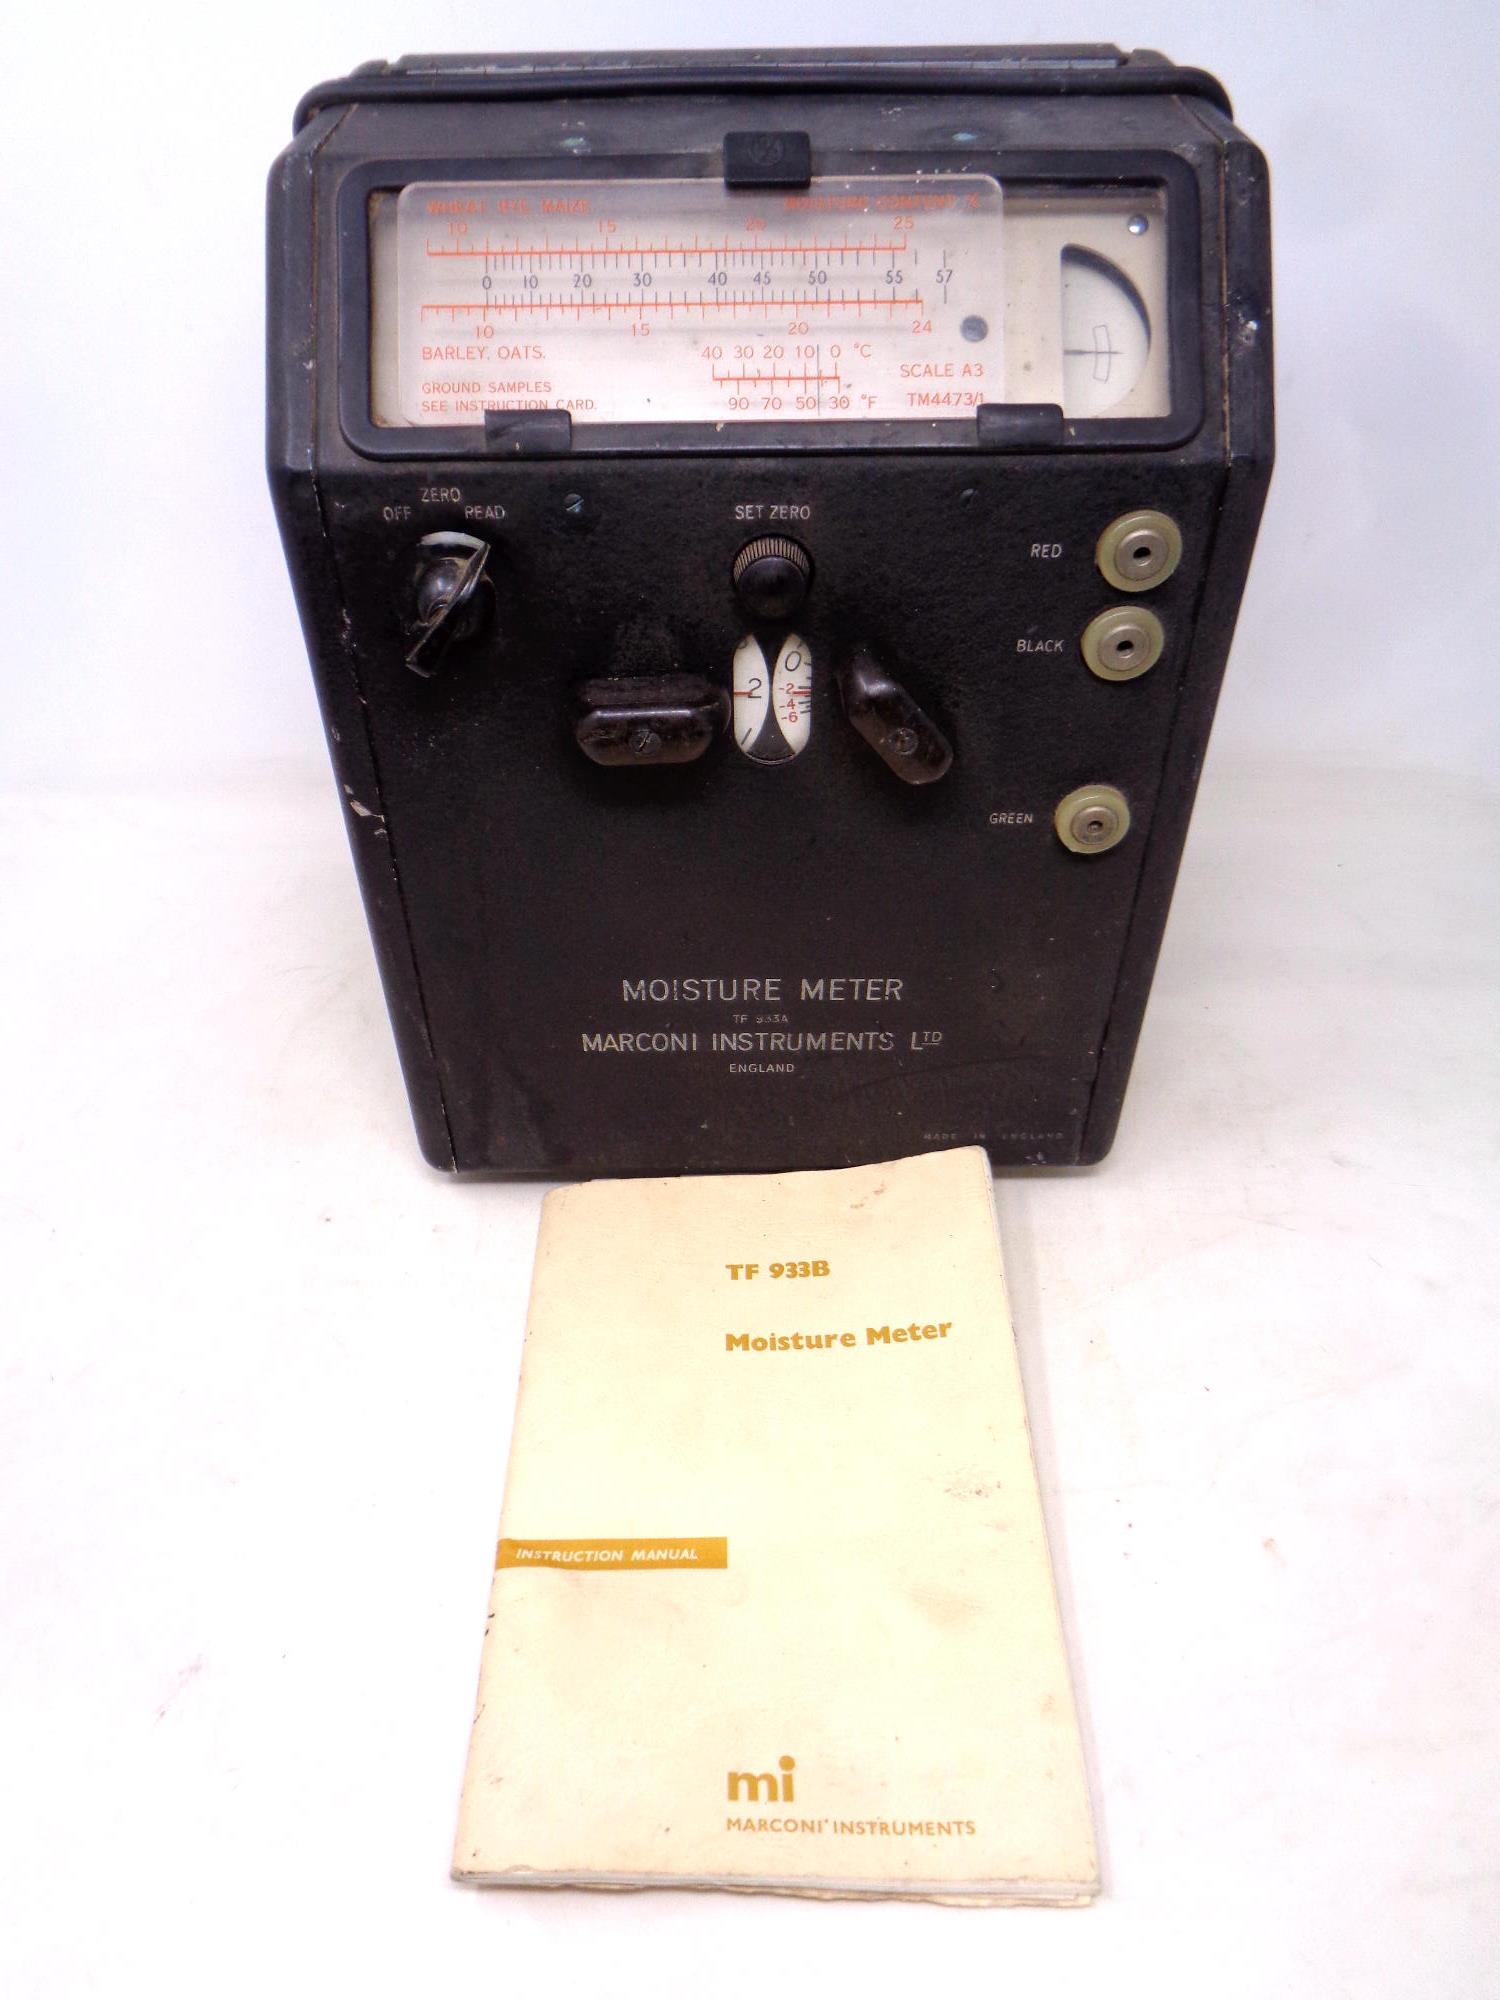 A Marconi TF933B moisture meter with original instructions